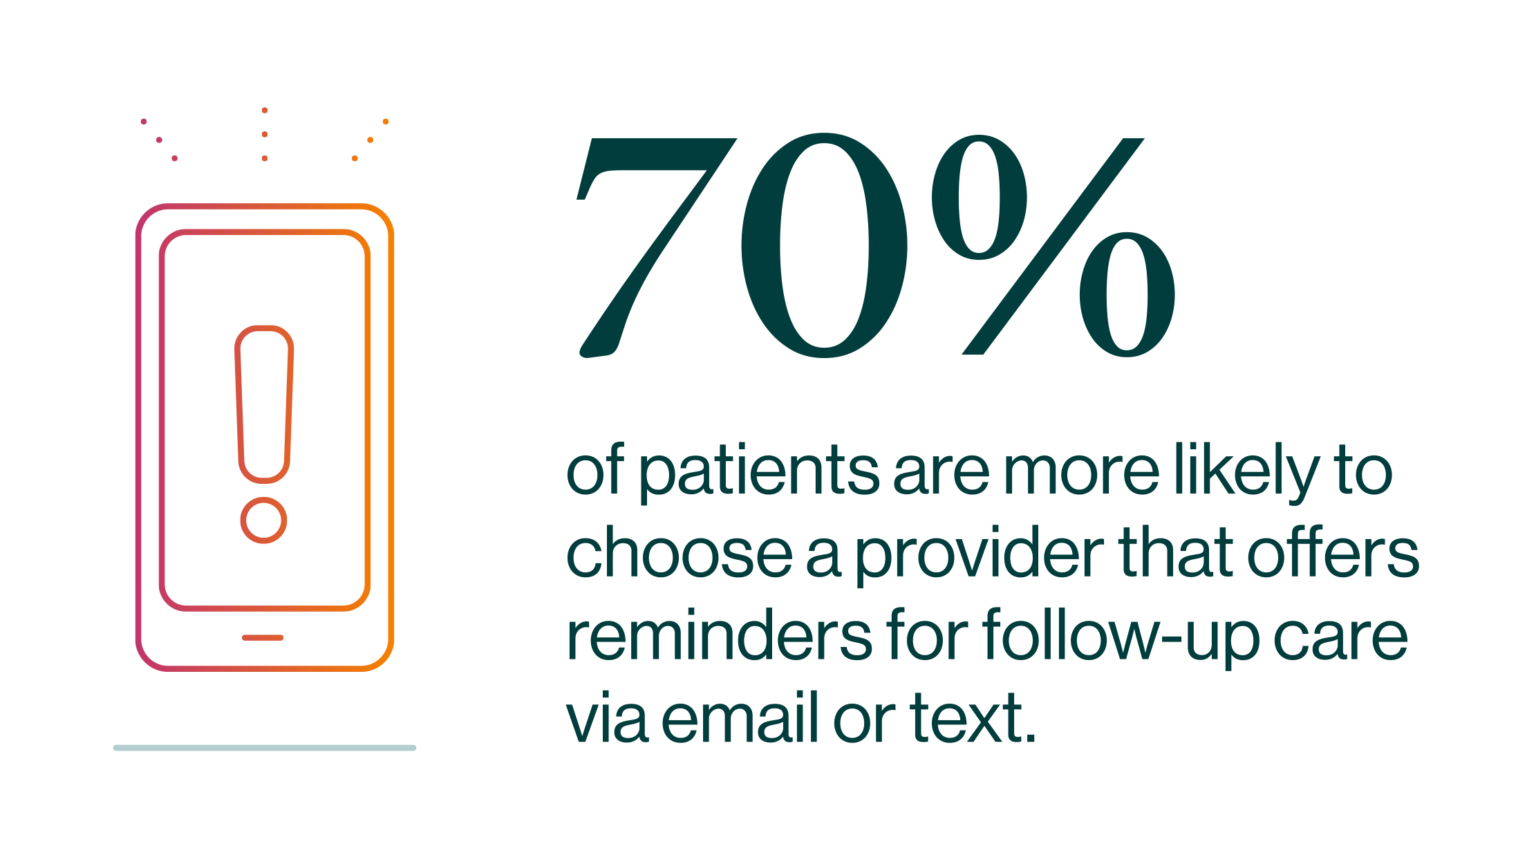 70% of patients are more likely to choose a provider that offers reminders for follow-up care via email or text